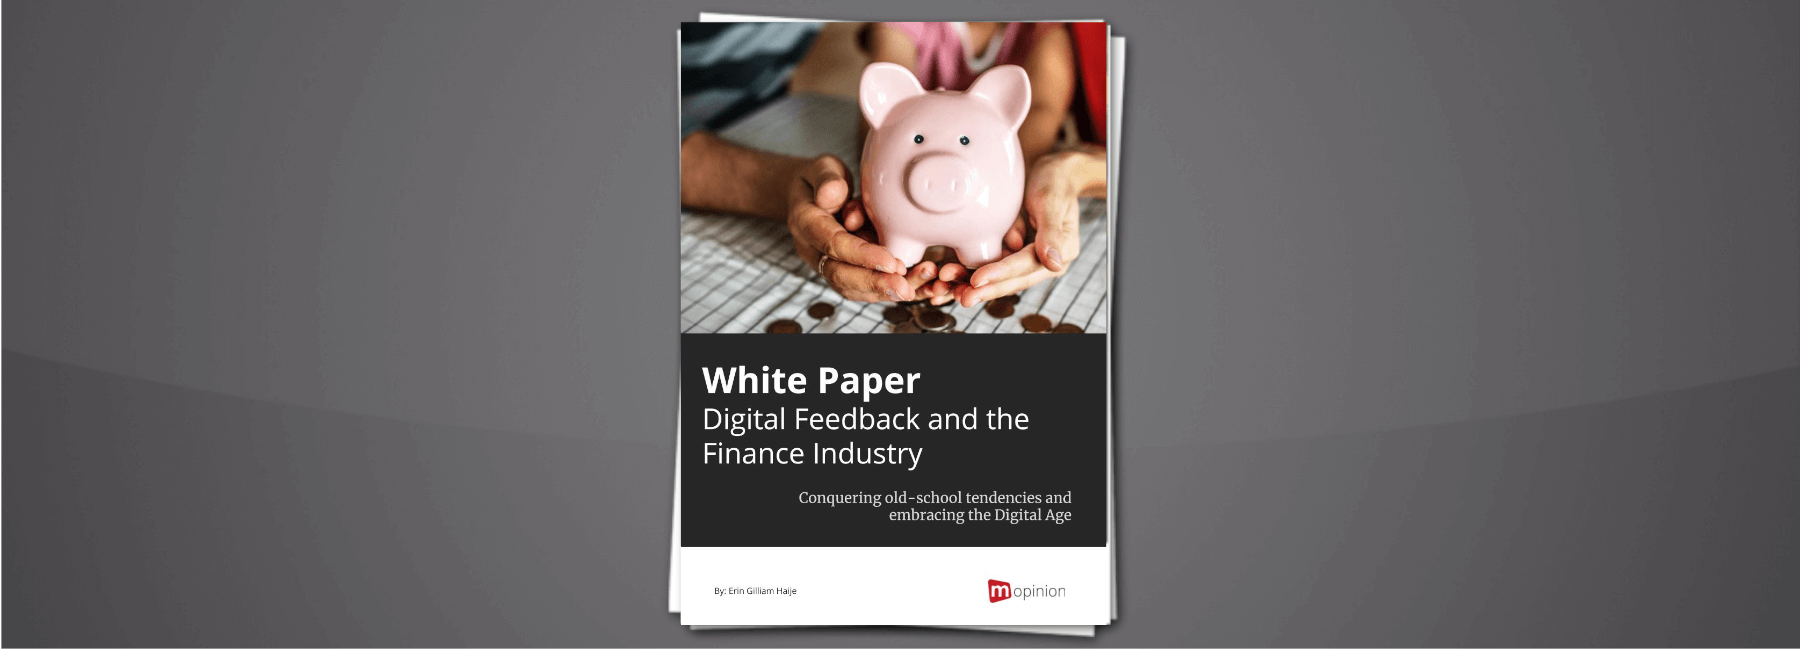 New White Paper: Digital Feedback and the Finance Industry